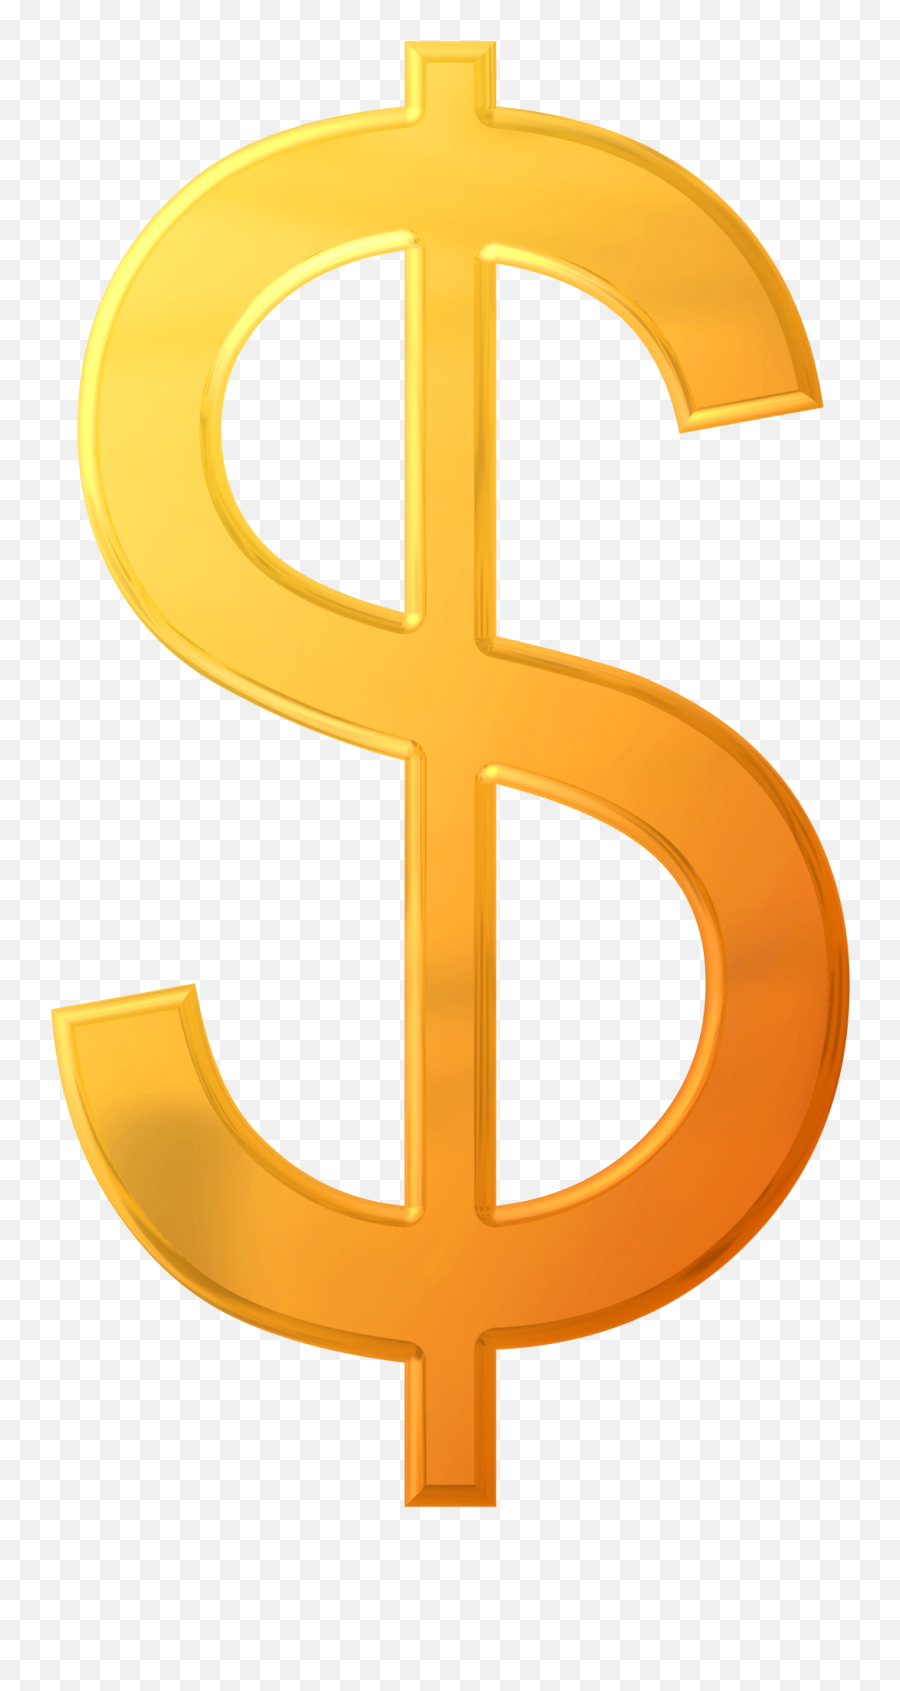 Coin Clipart Dollar Sign Picture 753384 Coin Clipart - Dollar Sign Transparent Emoji,Dollar Sign Clipart